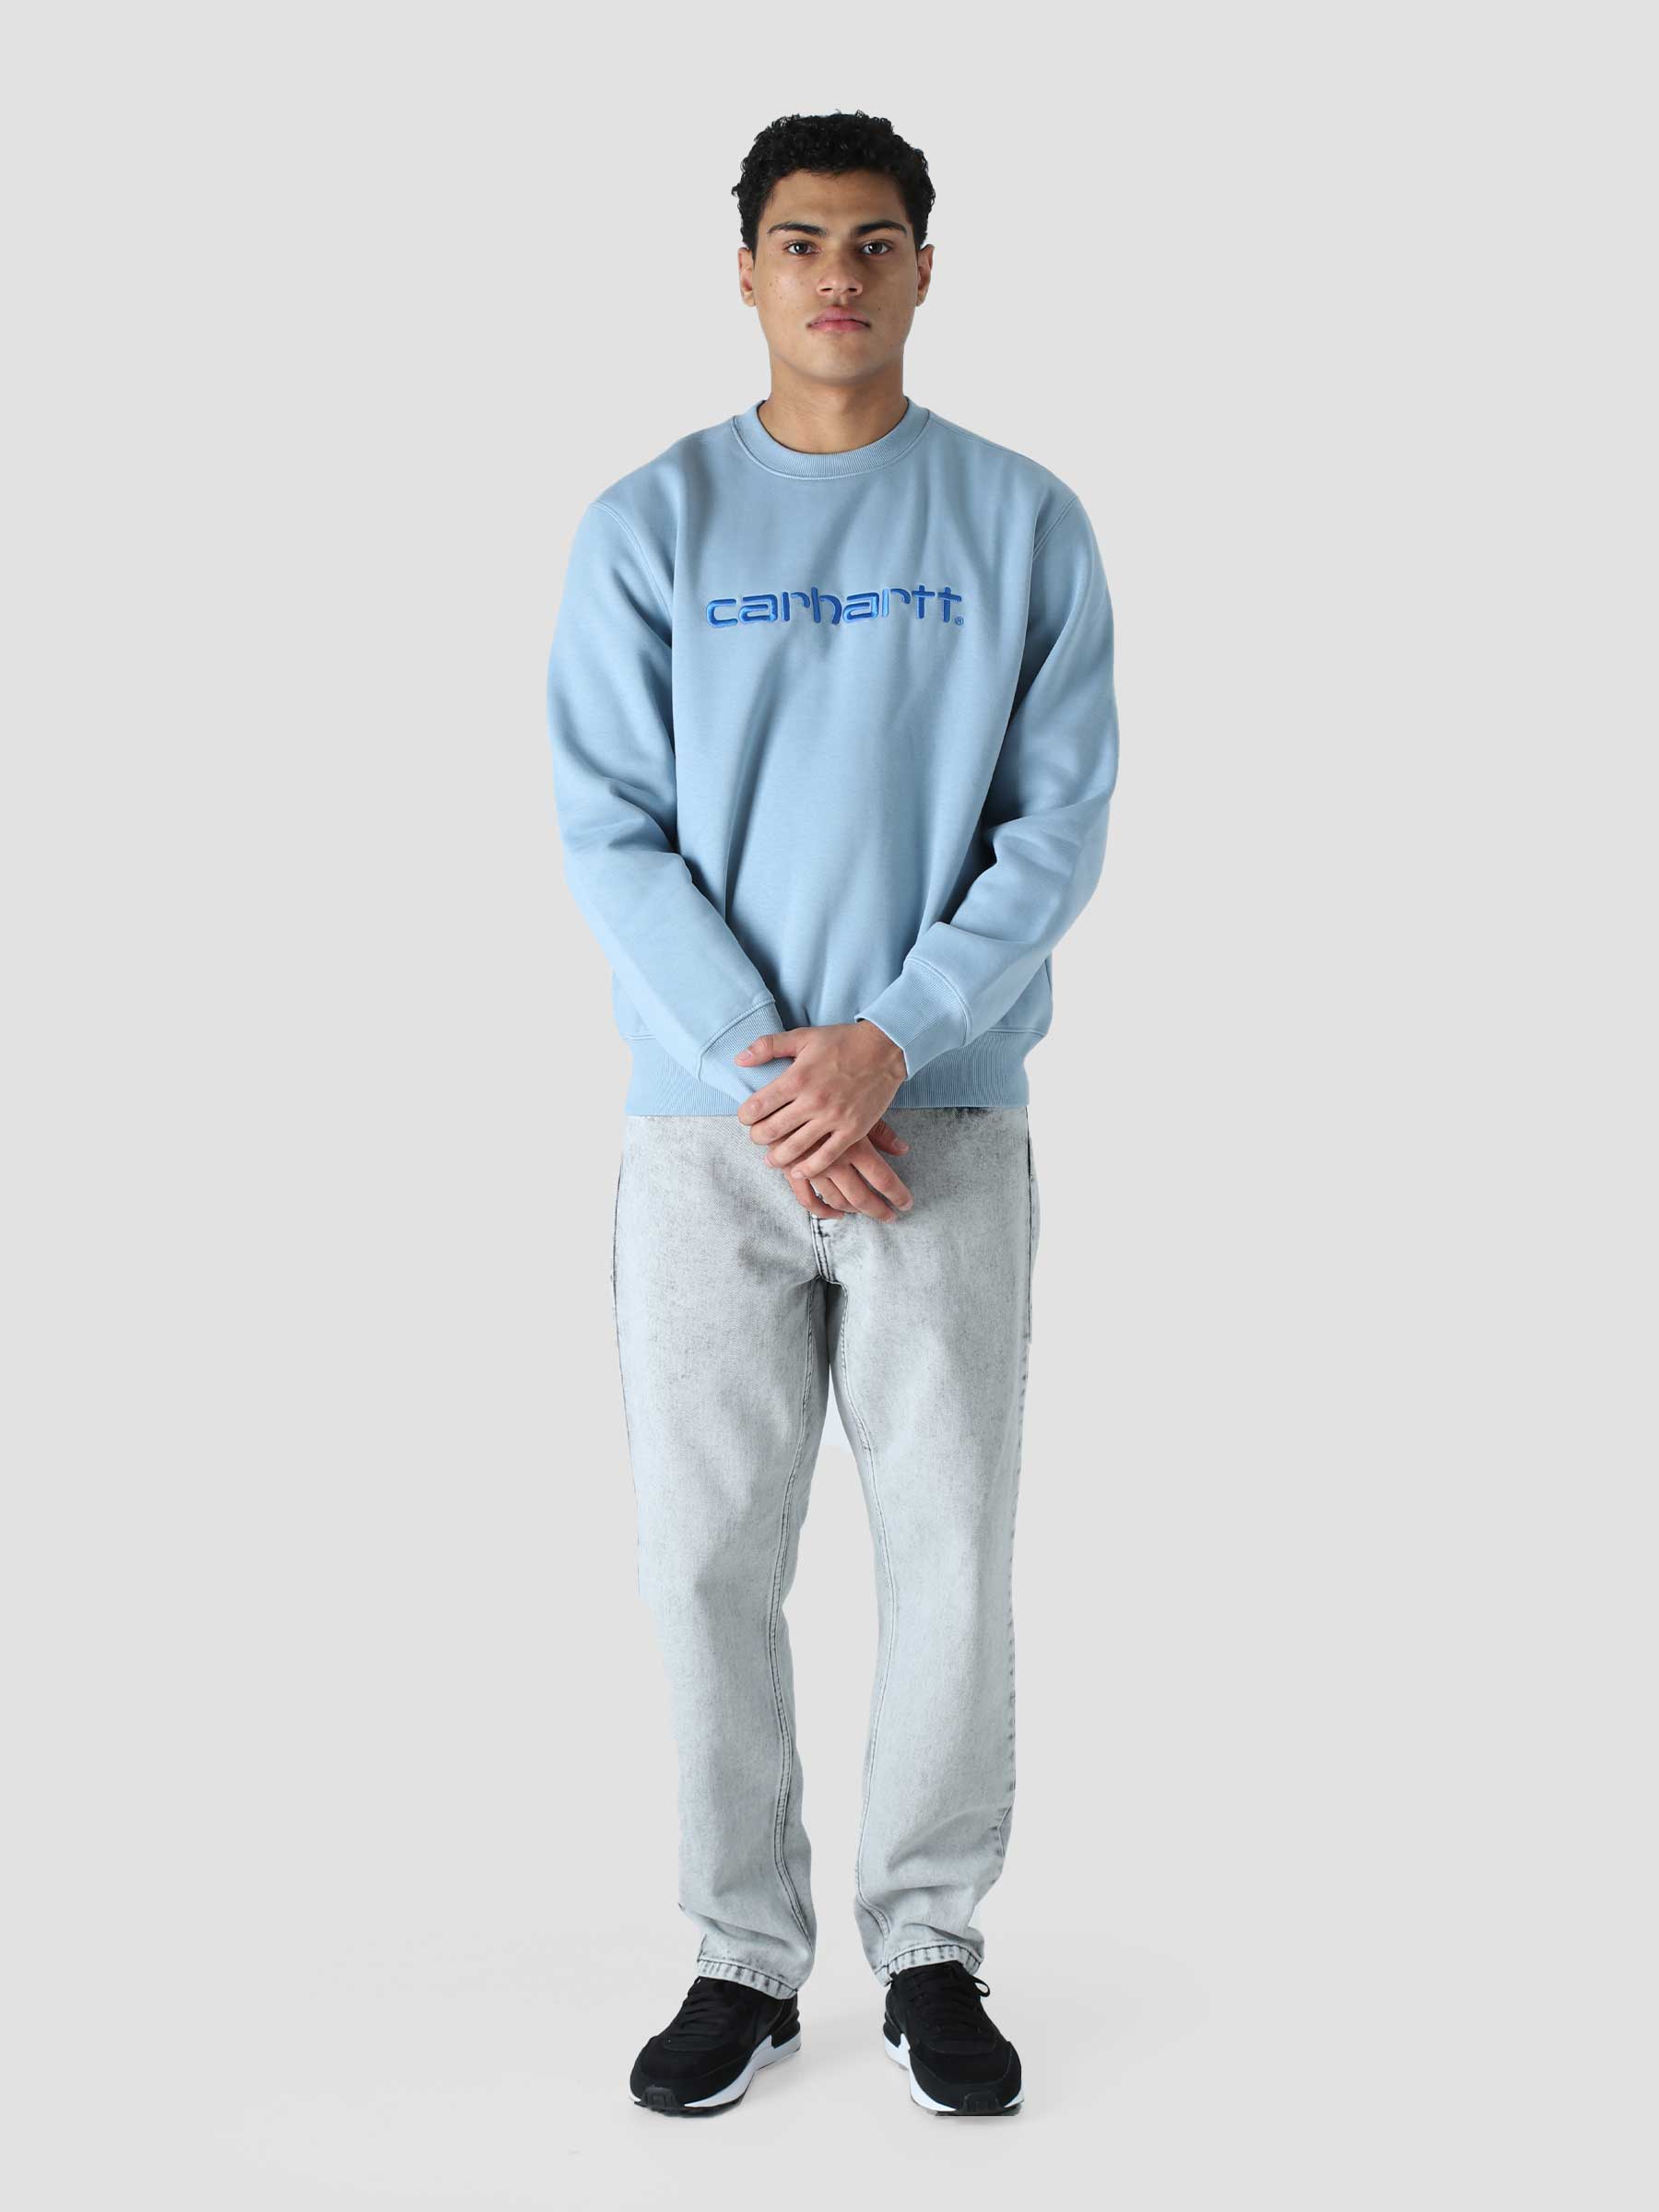 Carhartt Sweat Frosted Blue Gulf I030229-0SOXX